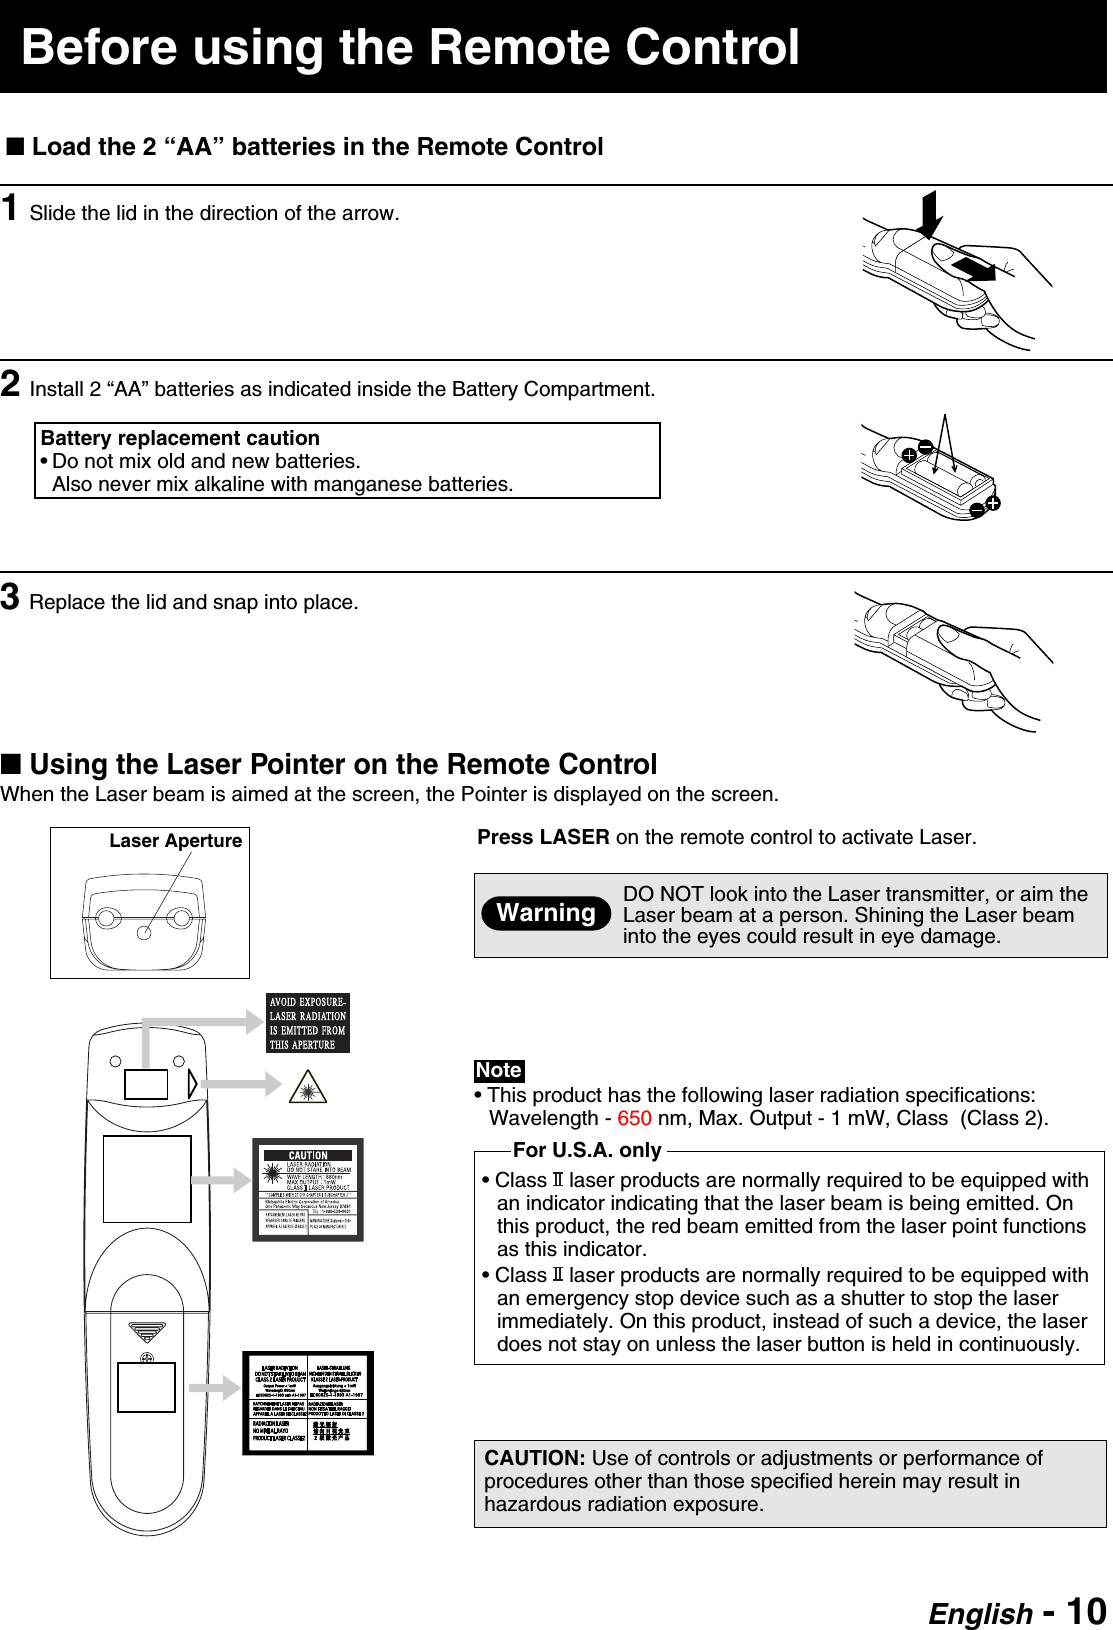 English - 10■ Using the Laser Pointer on the Remote ControlWhen the Laser beam is aimed at the screen, the Pointer is displayed on the screen.Press LASER on the remote control to activate Laser.DO NOT look into the Laser transmitter, or aim theLaser beam at a person. Shining the Laser beaminto the eyes could result in eye damage.Laser ApertureWarningCAUTION: Use of controls or adjustments or performance ofprocedures other than those specified herein may result inhazardous radiation exposure.• This product has the following laser radiation specifications:Wavelength - 650 nm, Max. Output - 1 mW, Class  (Class 2).• Class   laser products are normally required to be equipped withan indicator indicating that the laser beam is being emitted. Onthis product, the red beam emitted from the laser point functionsas this indicator.• Class   laser products are normally required to be equipped withan emergency stop device such as a shutter to stop the laserimmediately. On this product, instead of such a device, the laserdoes not stay on unless the laser button is held in continuously.Note1Slide the lid in the direction of the arrow.2Install 2 “AA” batteries as indicated inside the Battery Compartment.■ Load the 2 “AA” batteries in the Remote ControlBefore using the Remote ControlFor U.S.A. onlyBattery replacement caution• Do not mix old and new batteries.Also never mix alkaline with manganese batteries.3Replace the lid and snap into place.